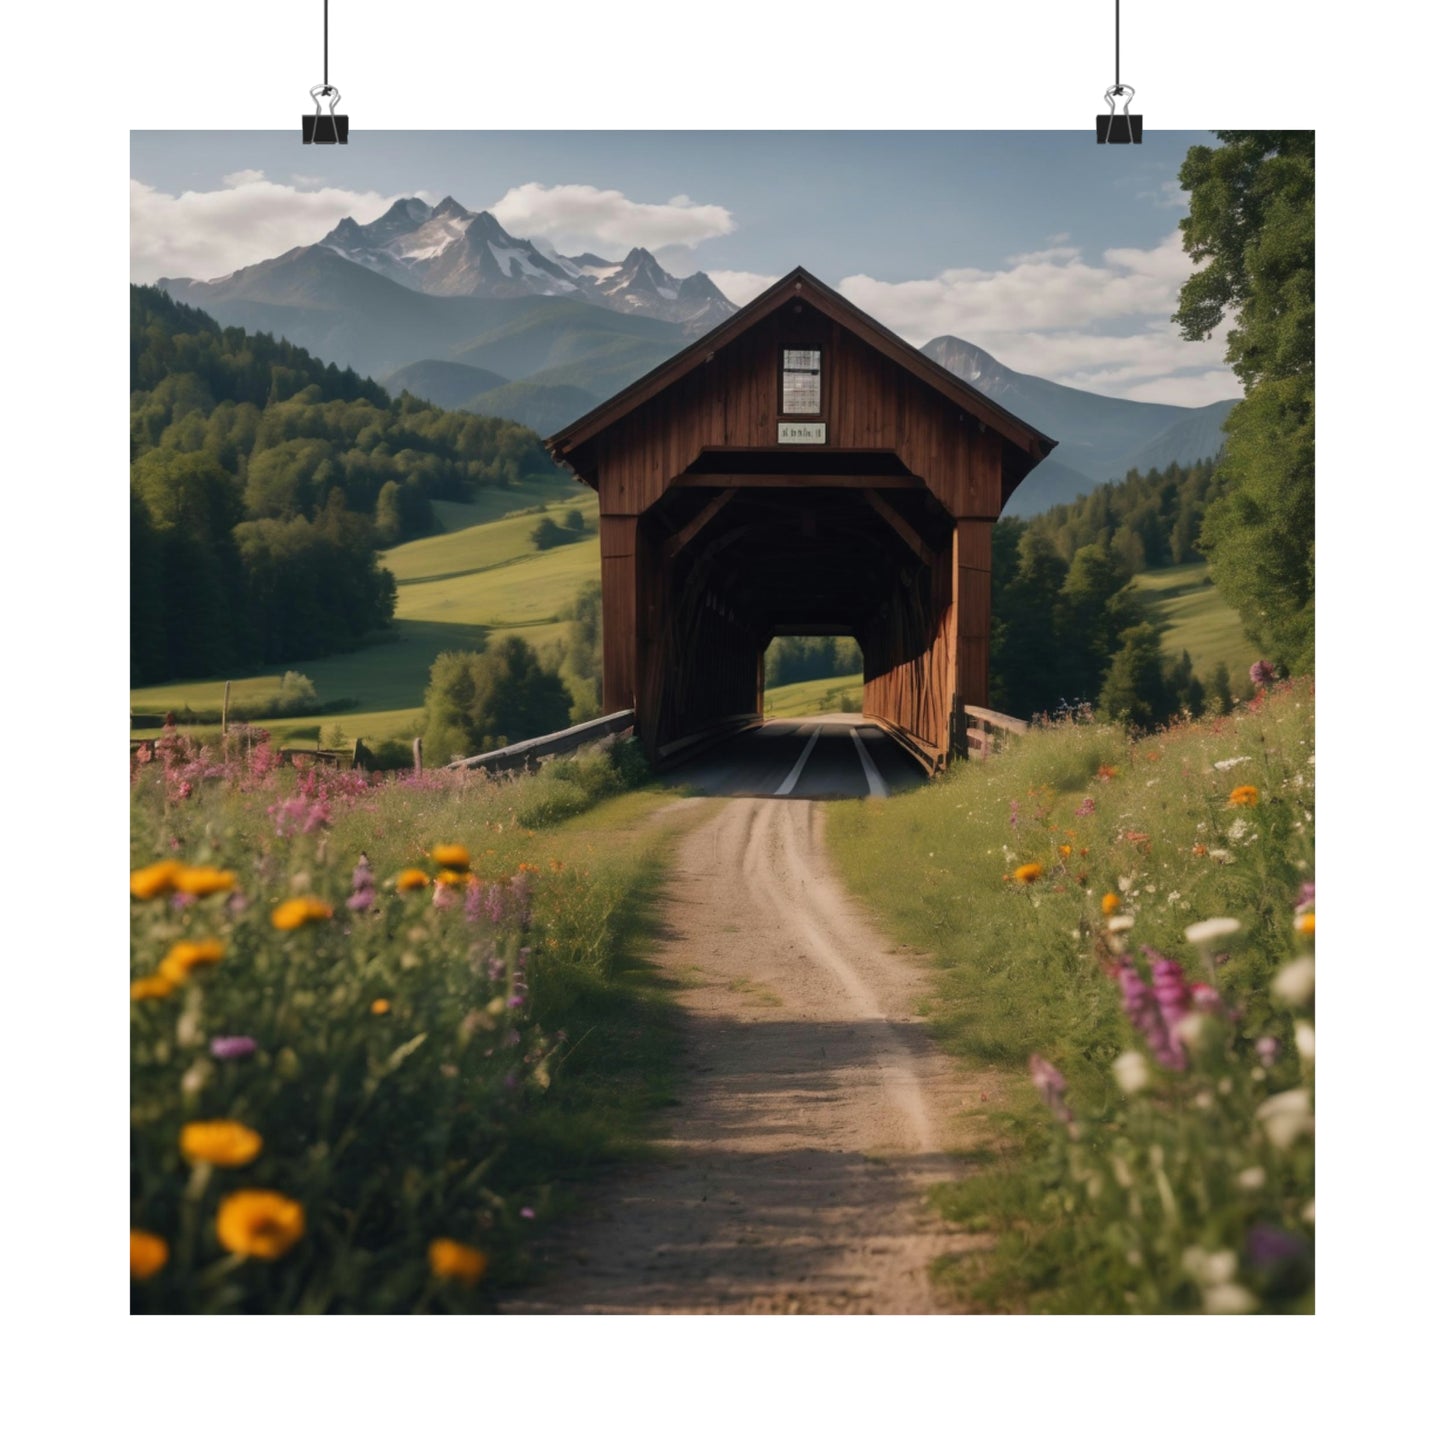 Covered bridge print, Covered bridge poster, country road poster, Nature inspired poster, rustic covered bridge poster